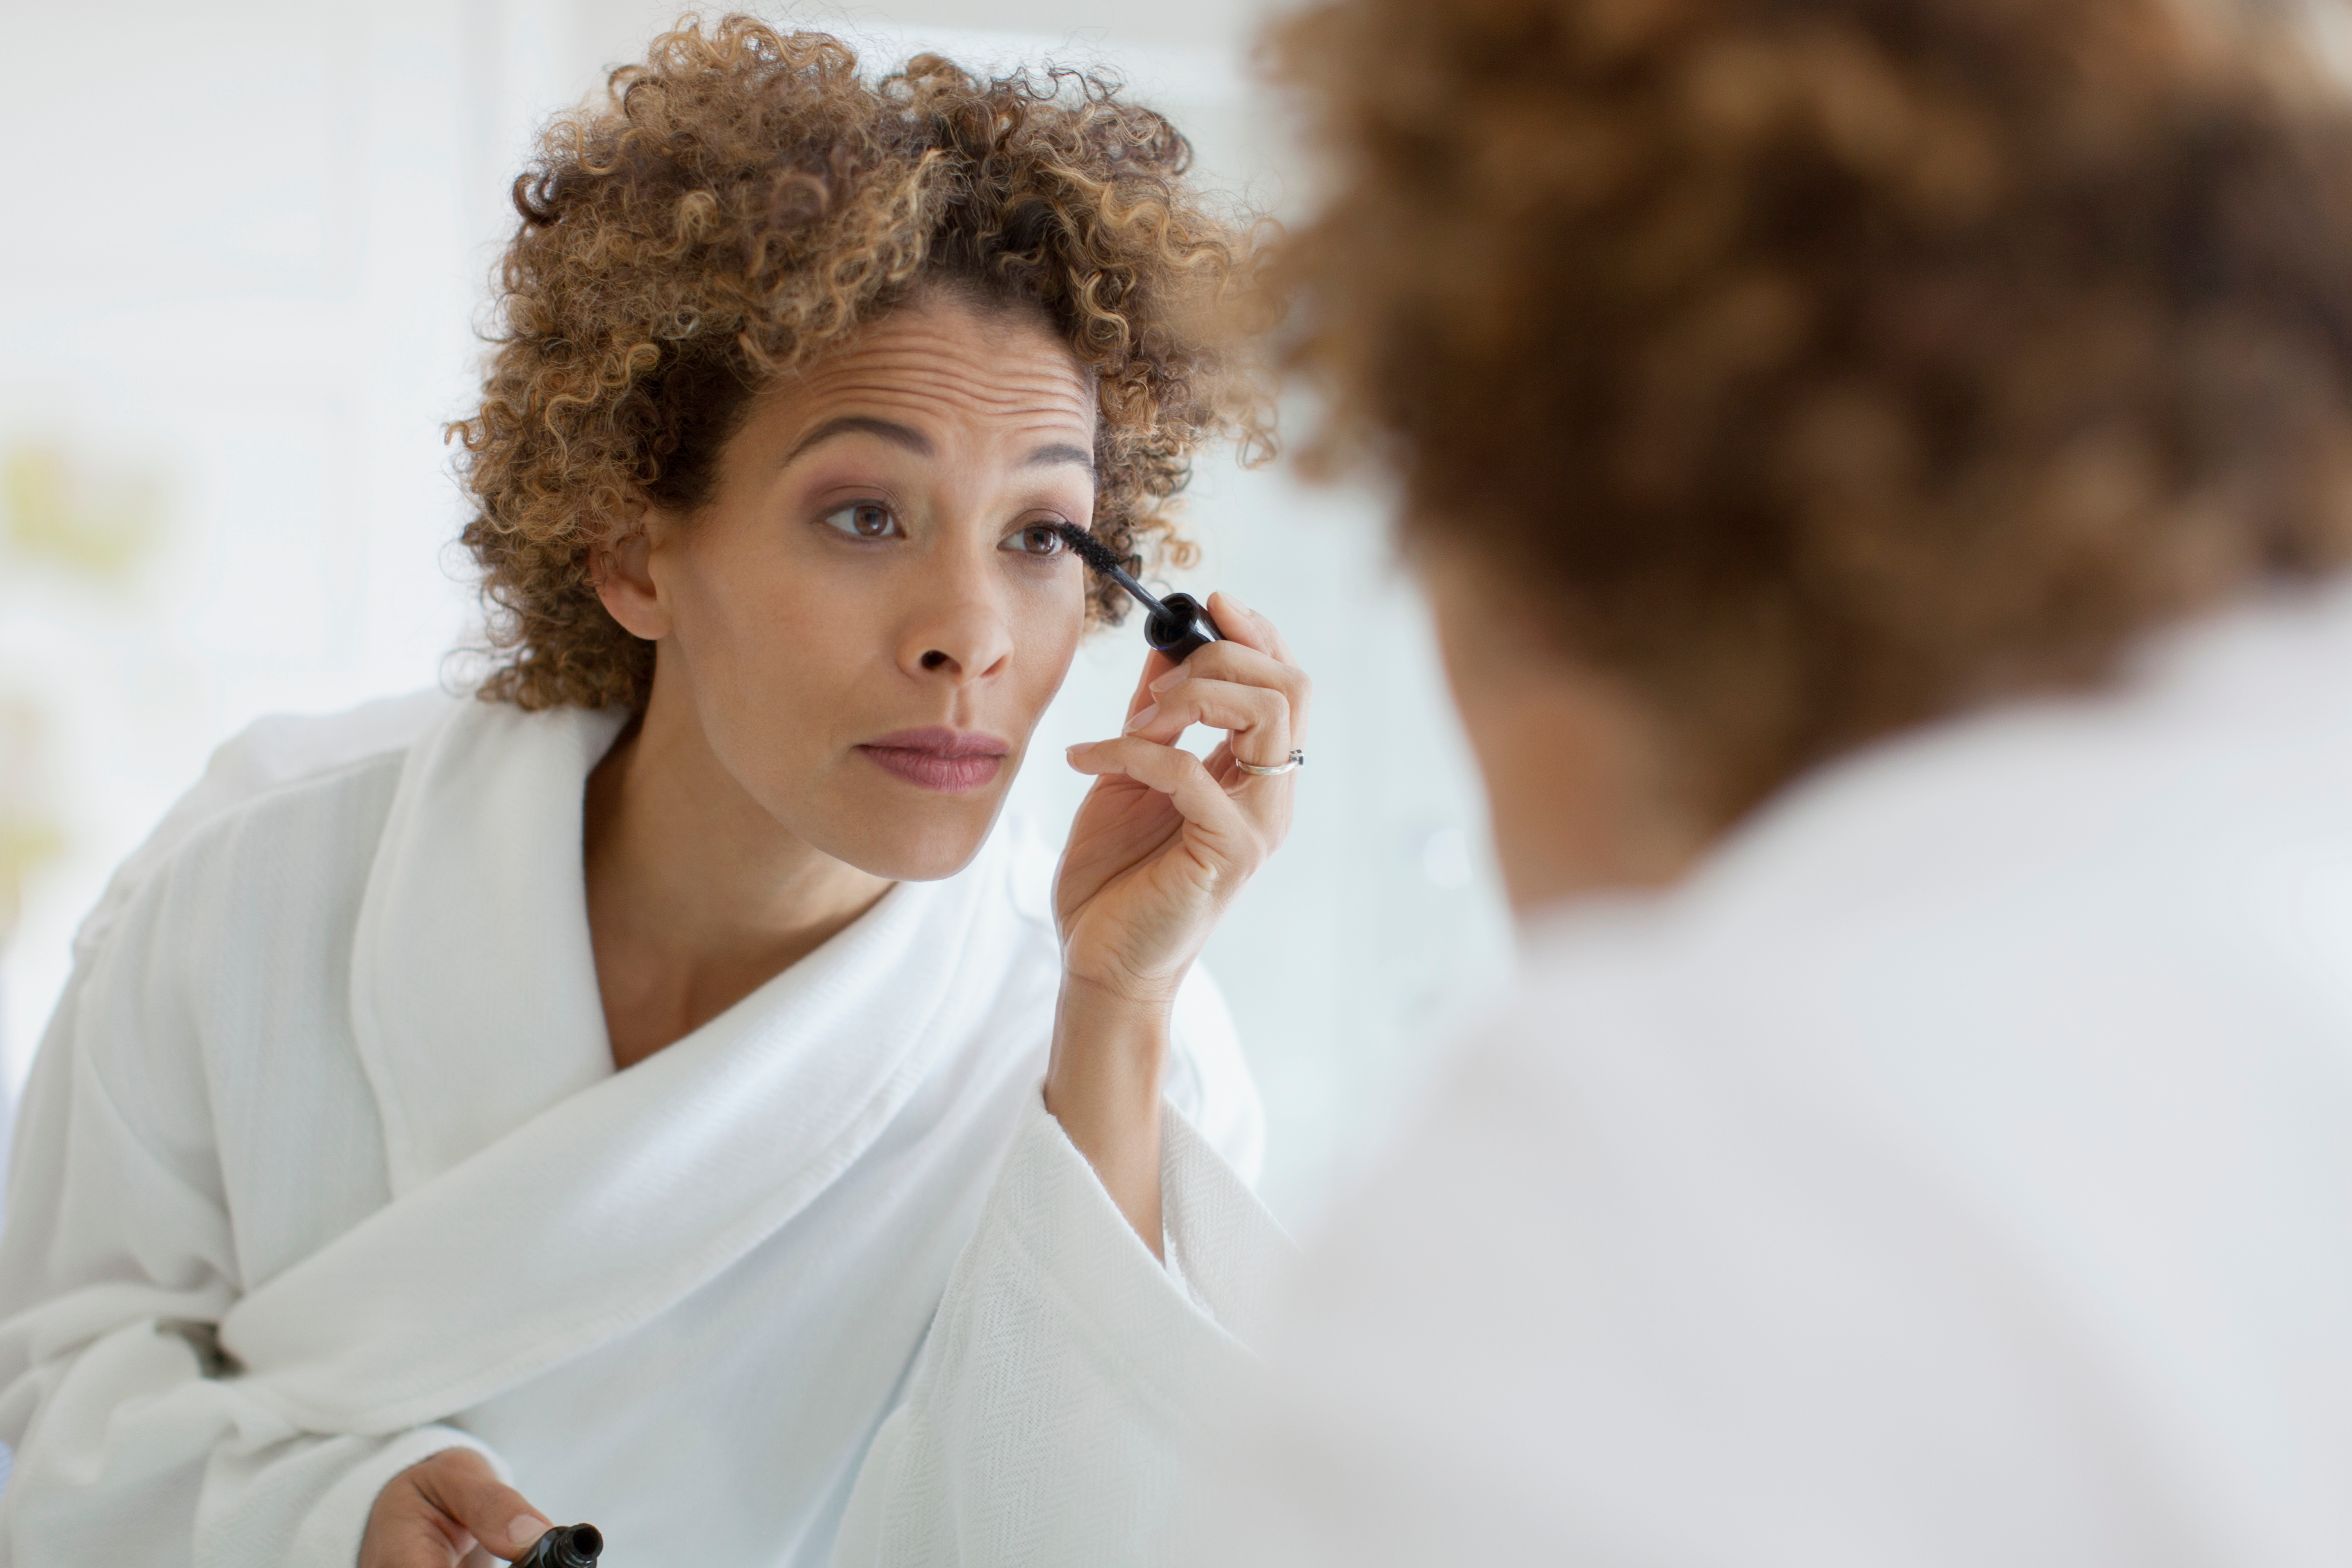 A woman applying mascara in front of a mirror